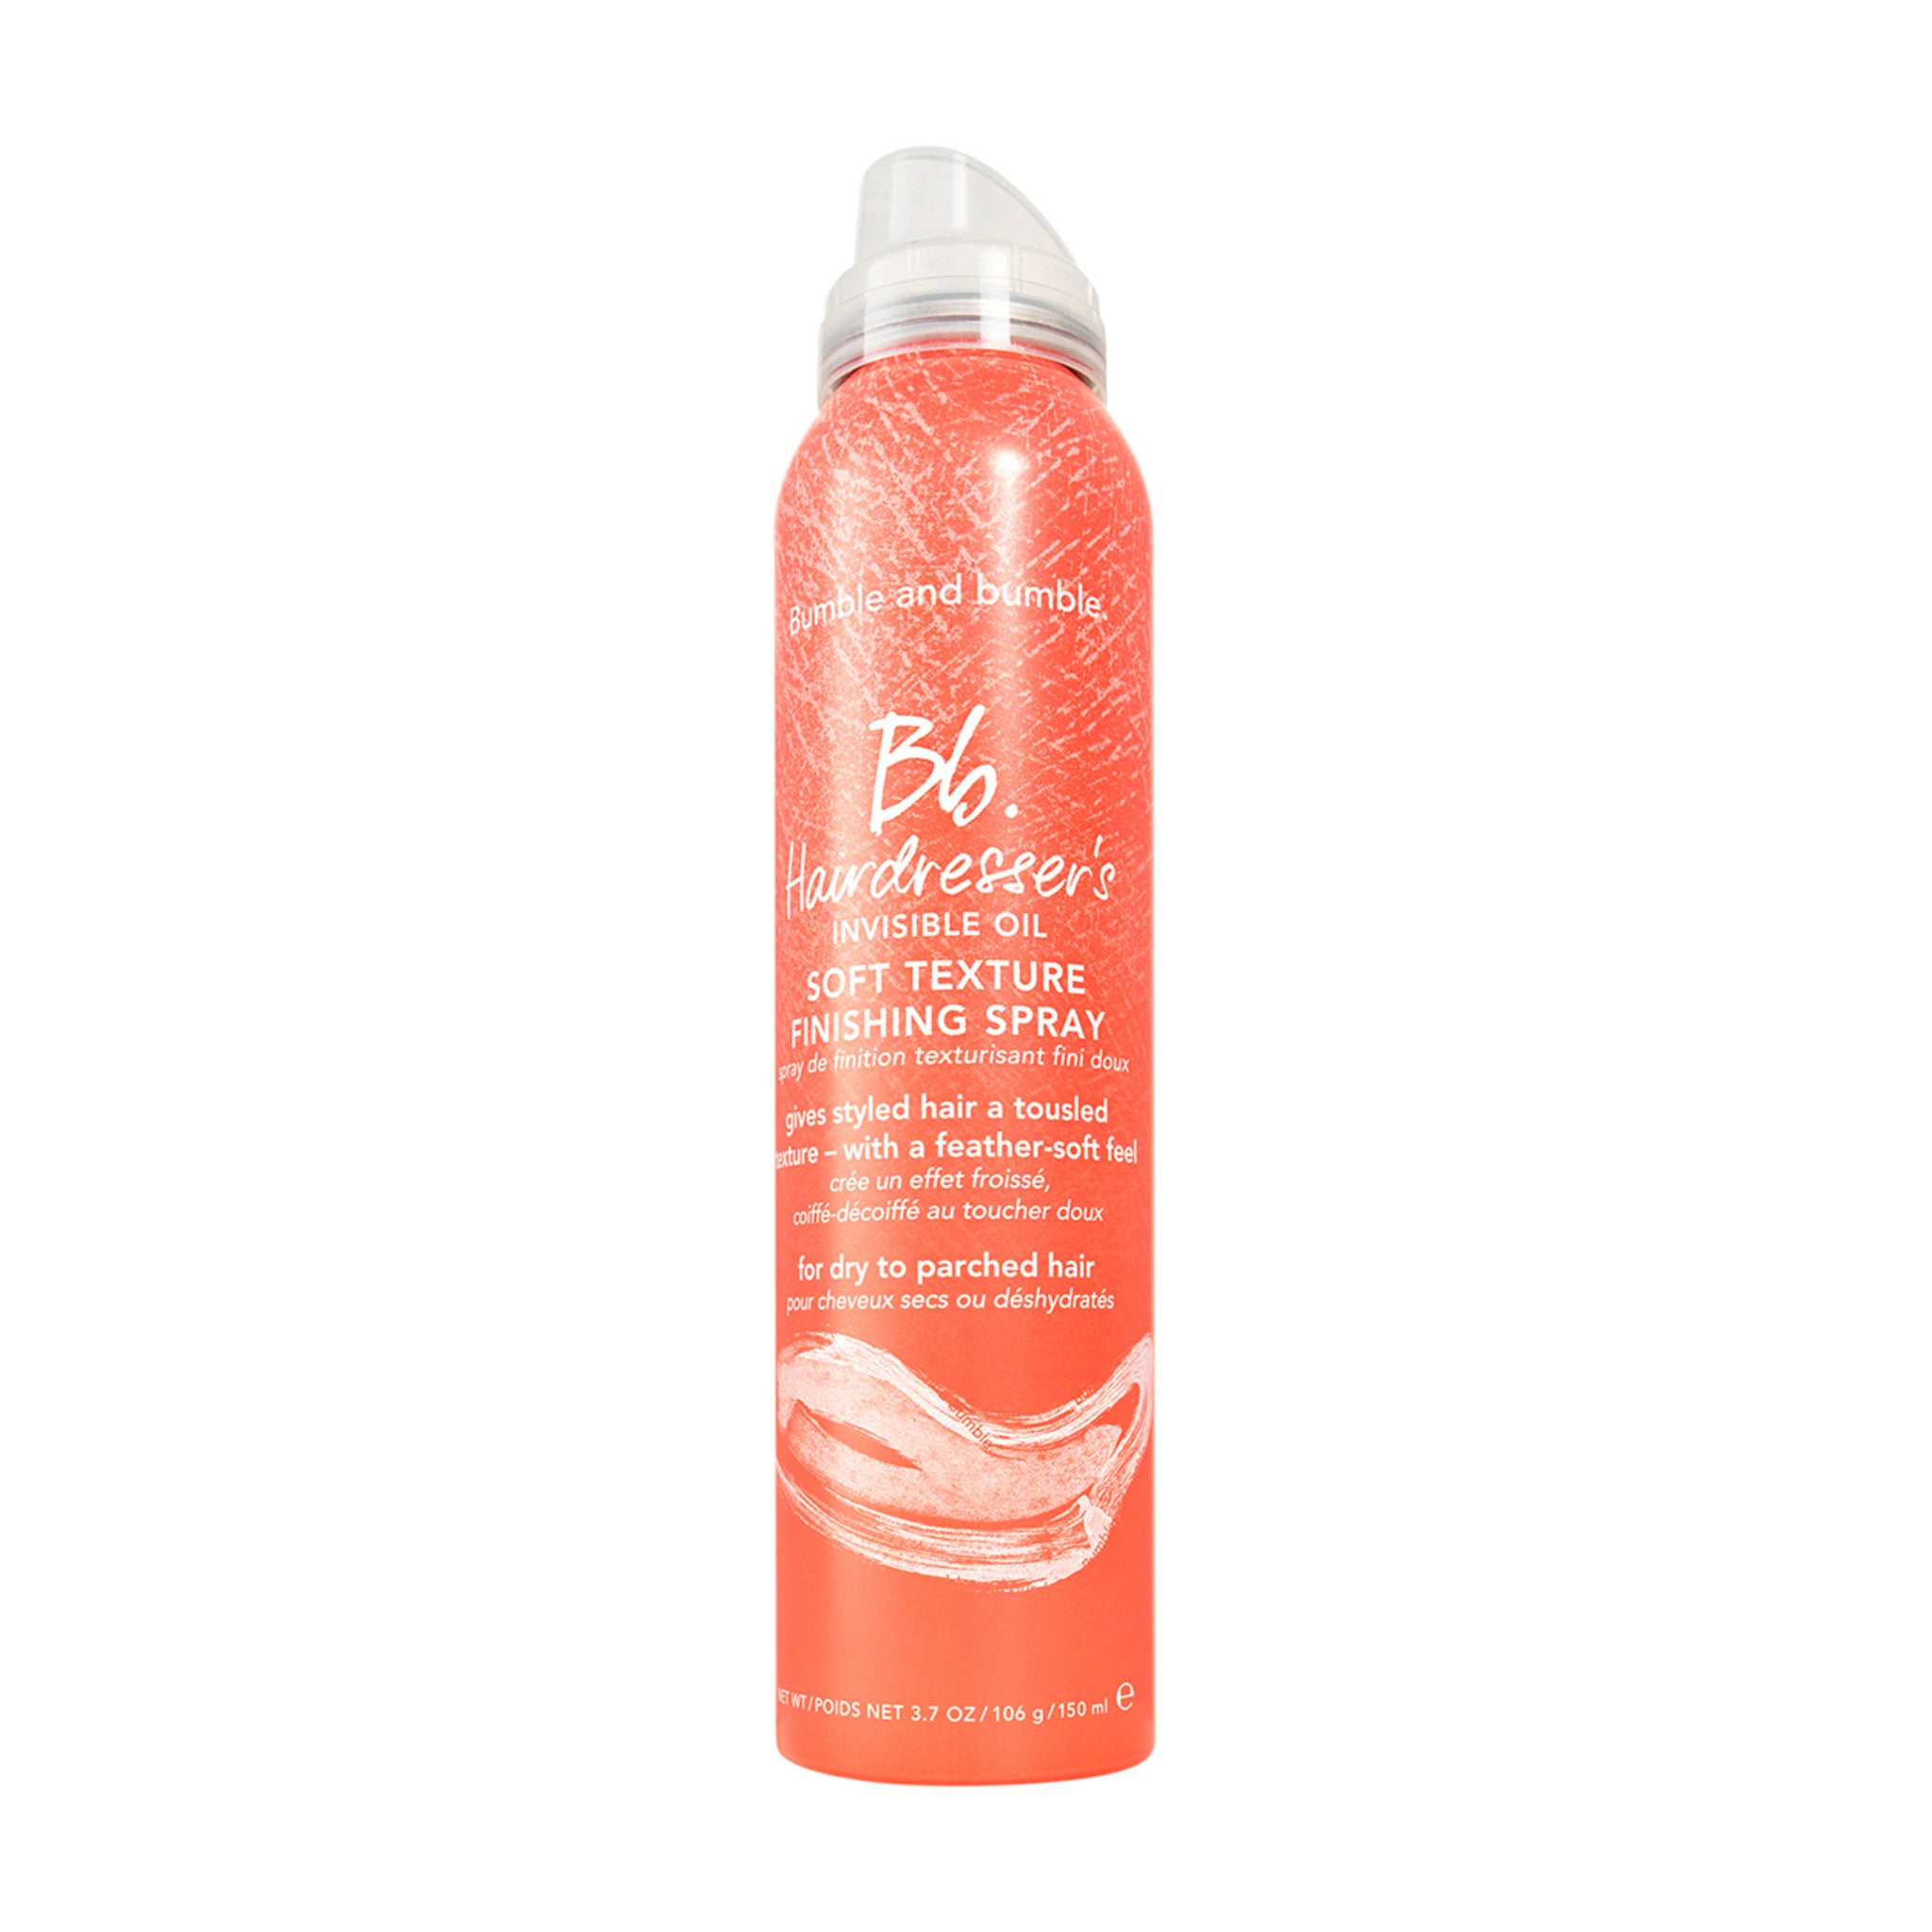 Bumble and Bumble Hairdresser's Invisible Oil Soft Texture Finishing Spray  – bluemercury